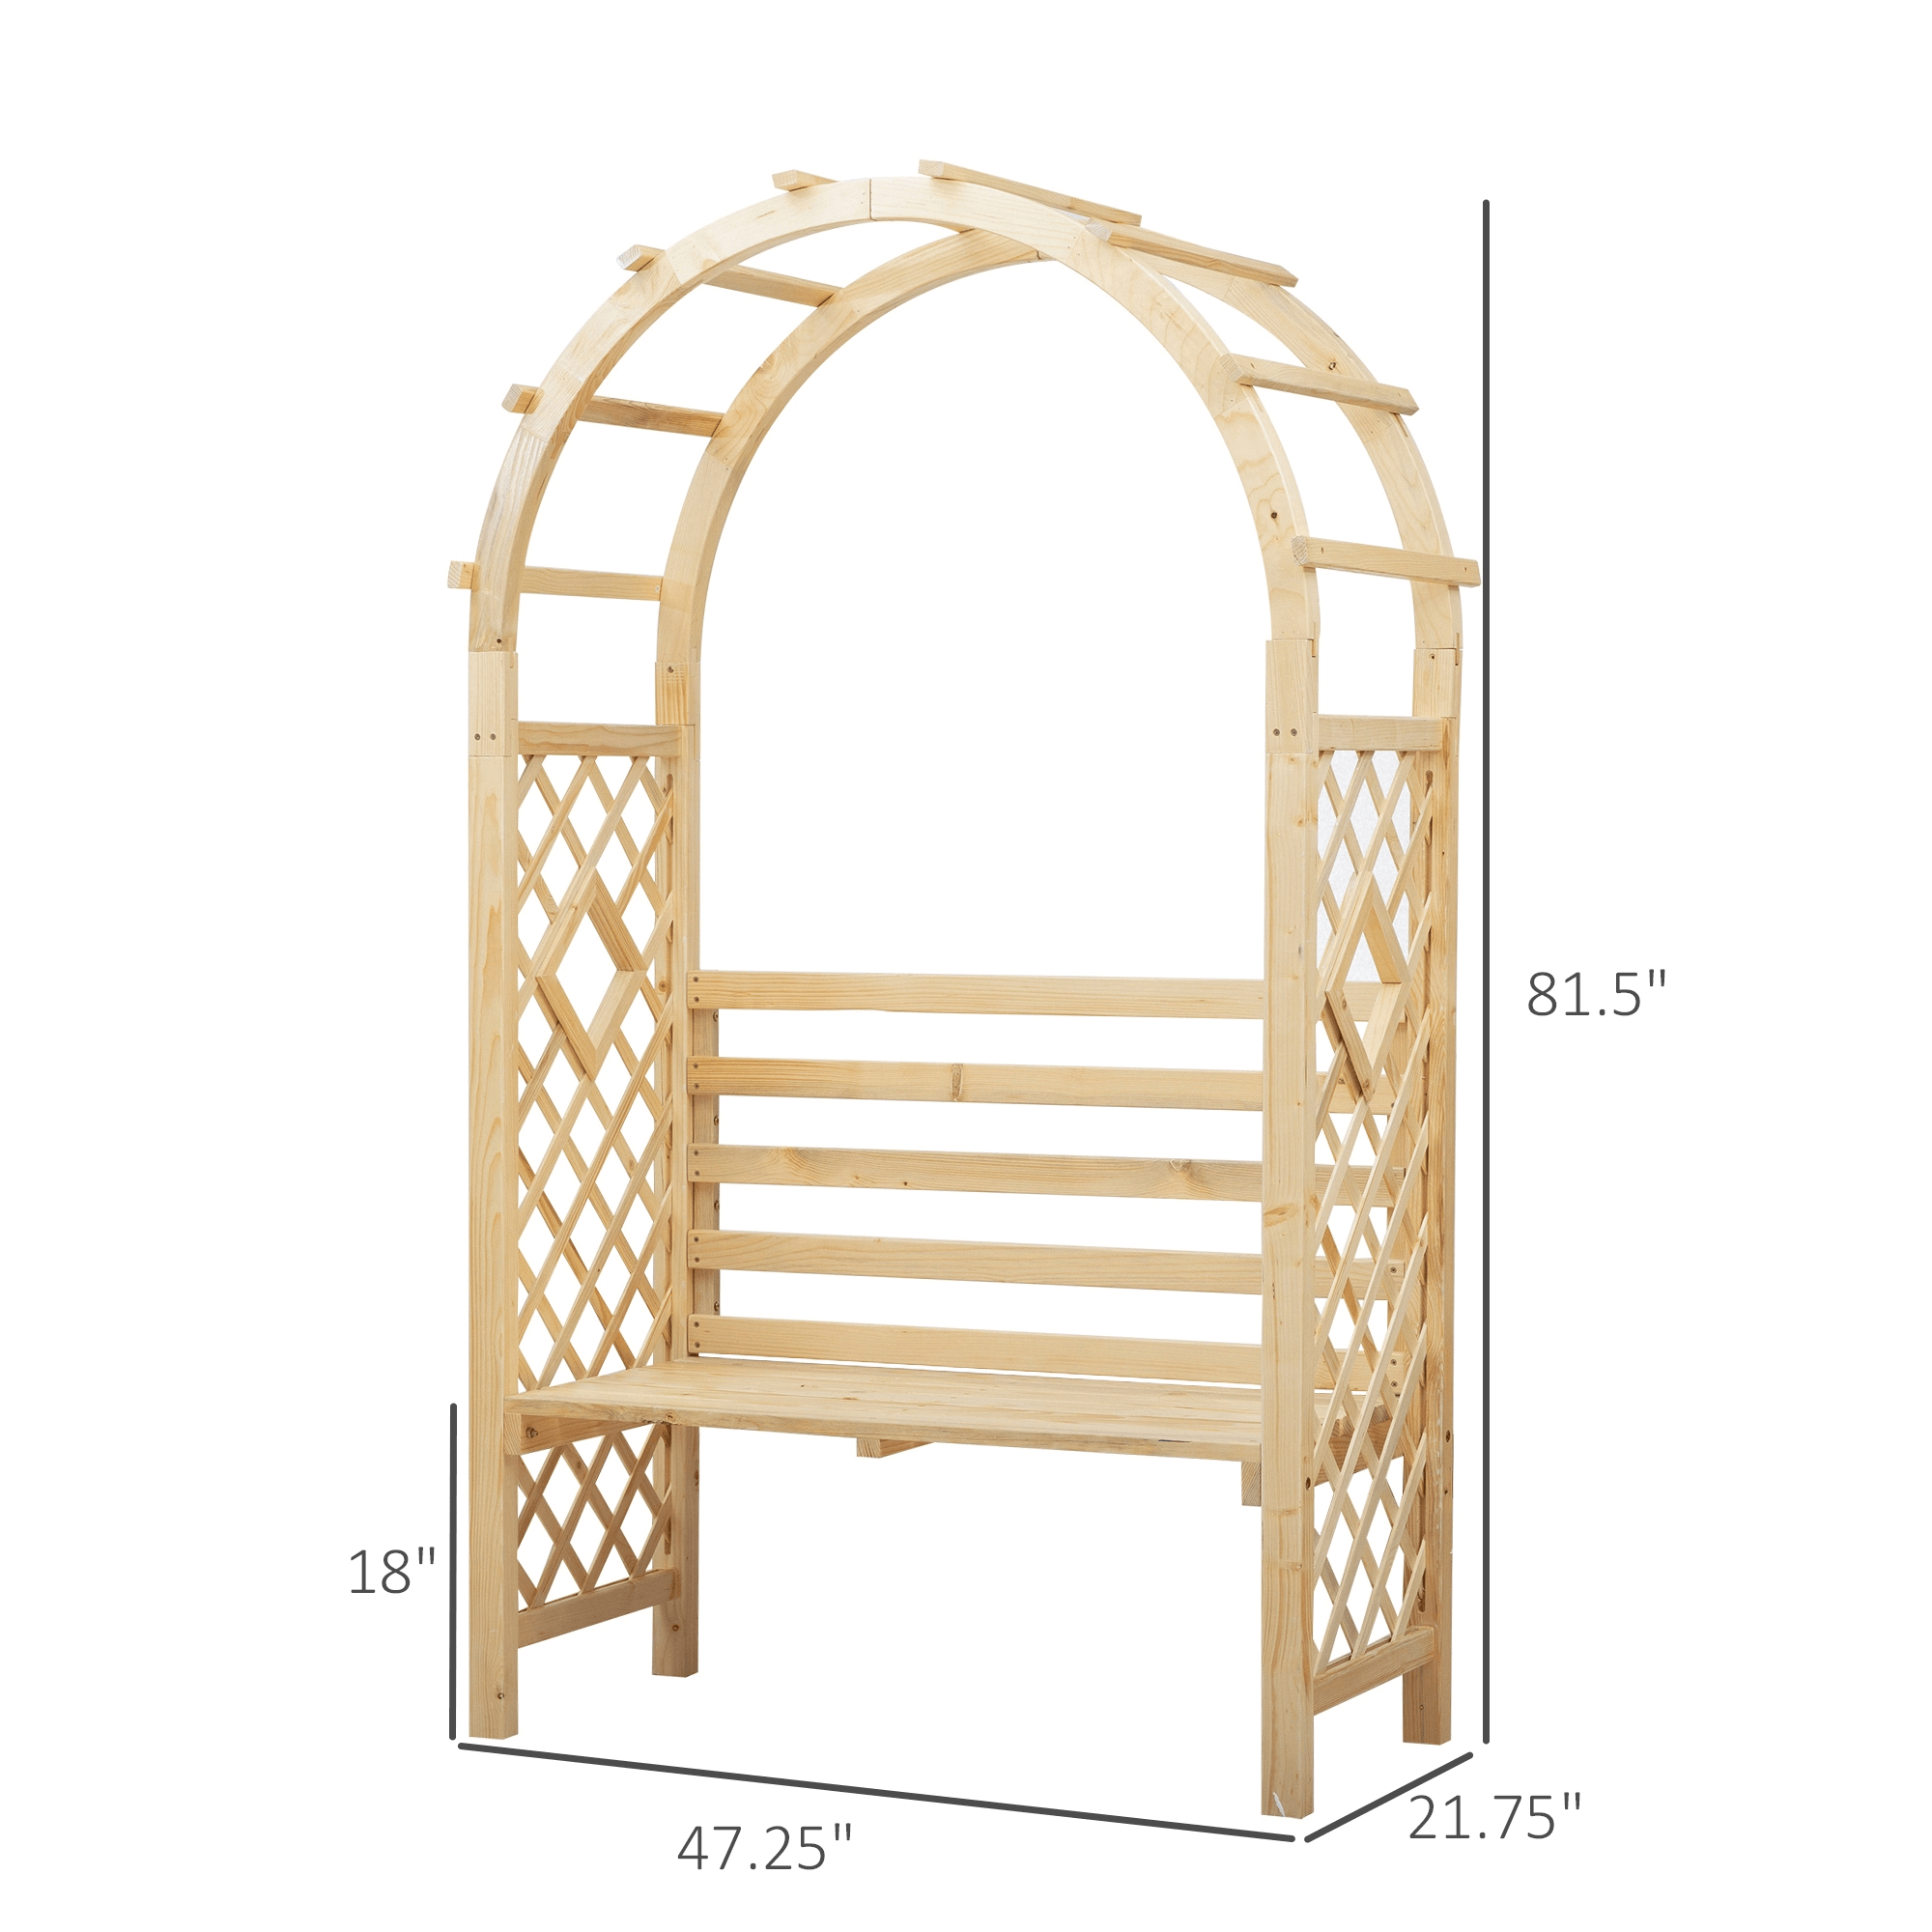 Garden Bench with Arch Wooden Bench Trellis for Vines/ Climbing Plants